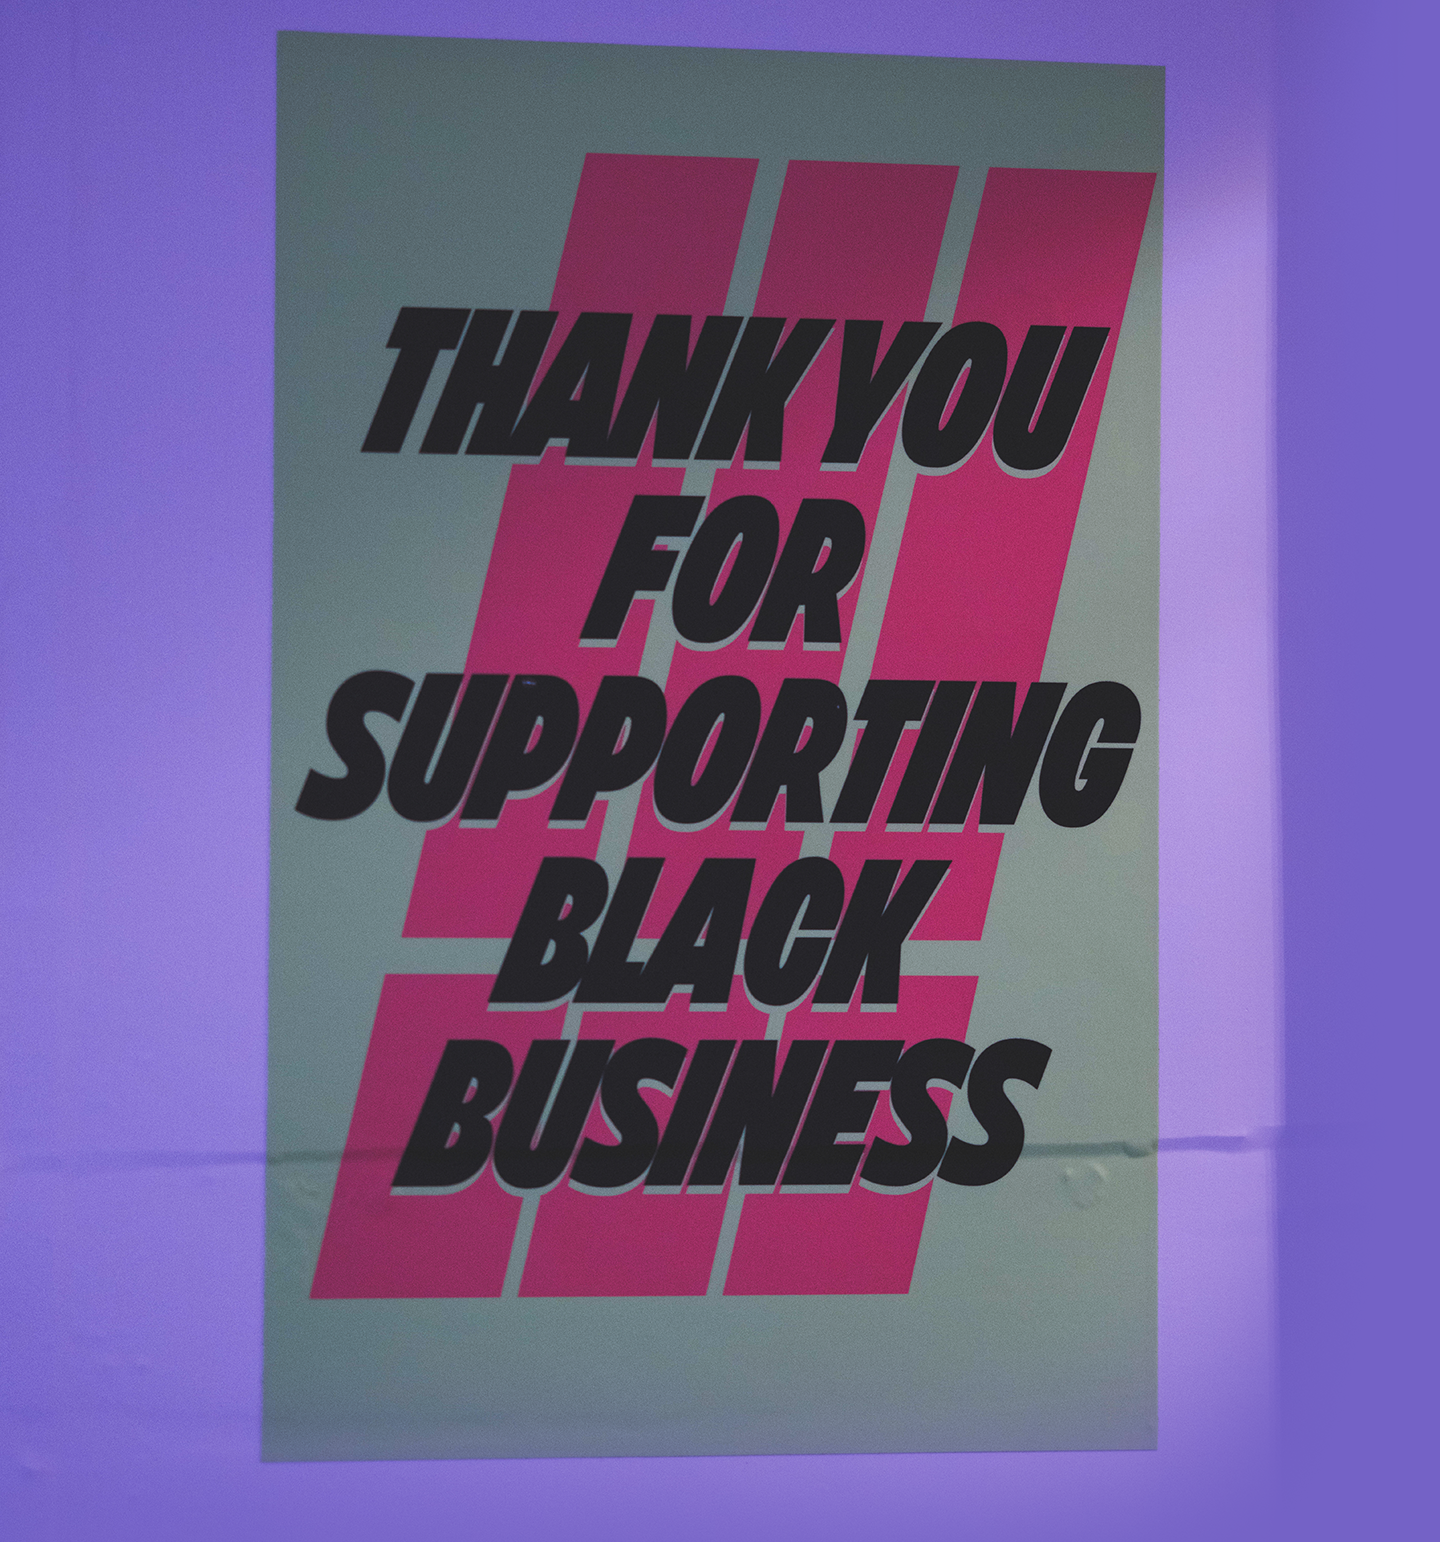 Thank you for supporting Black business 